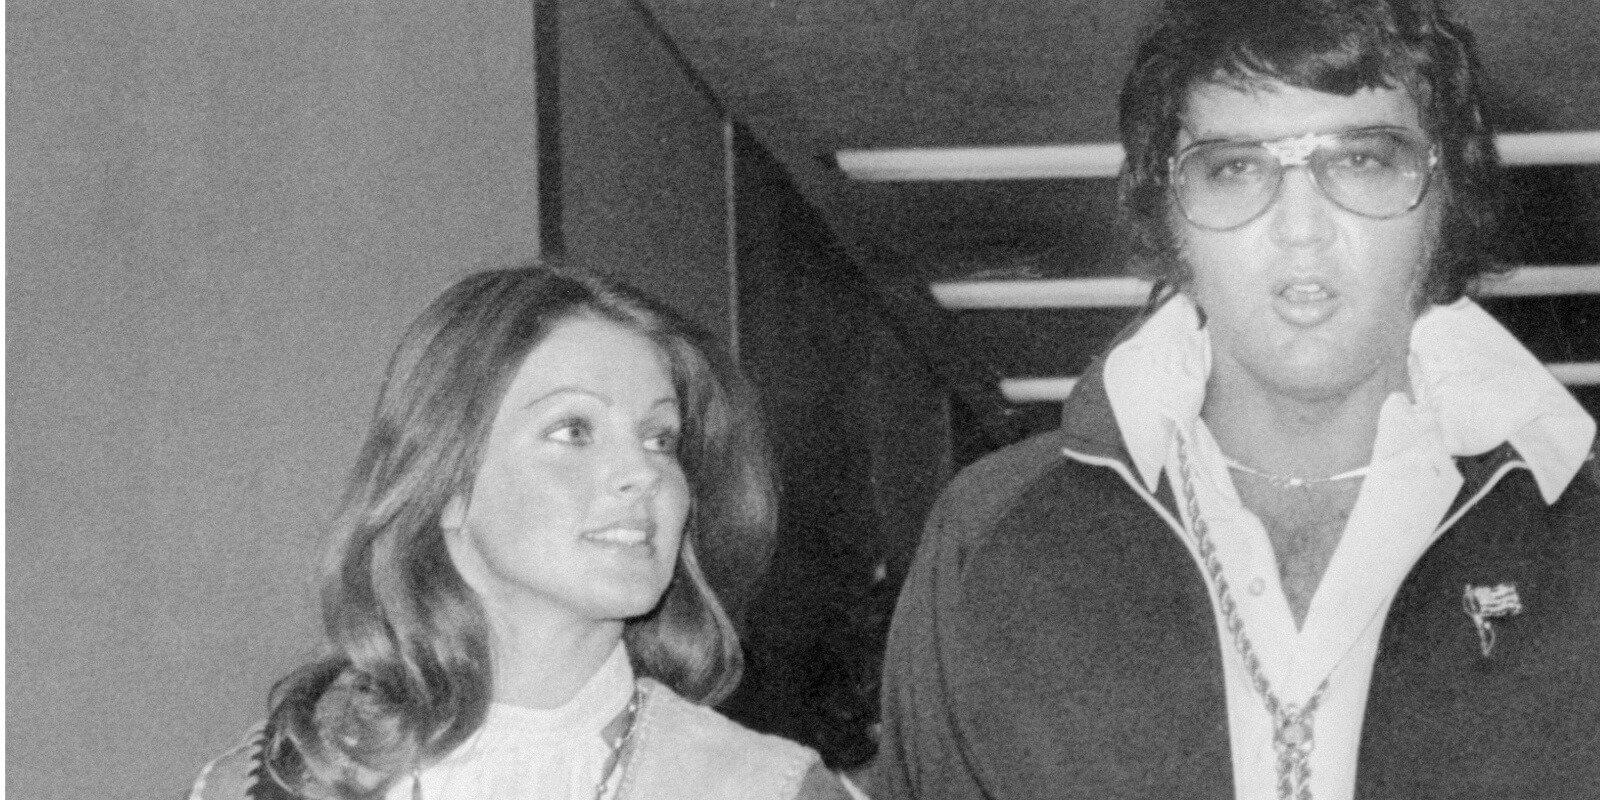 Priscilla and Elvis Presley photographed in 1973 as they left divorce court.